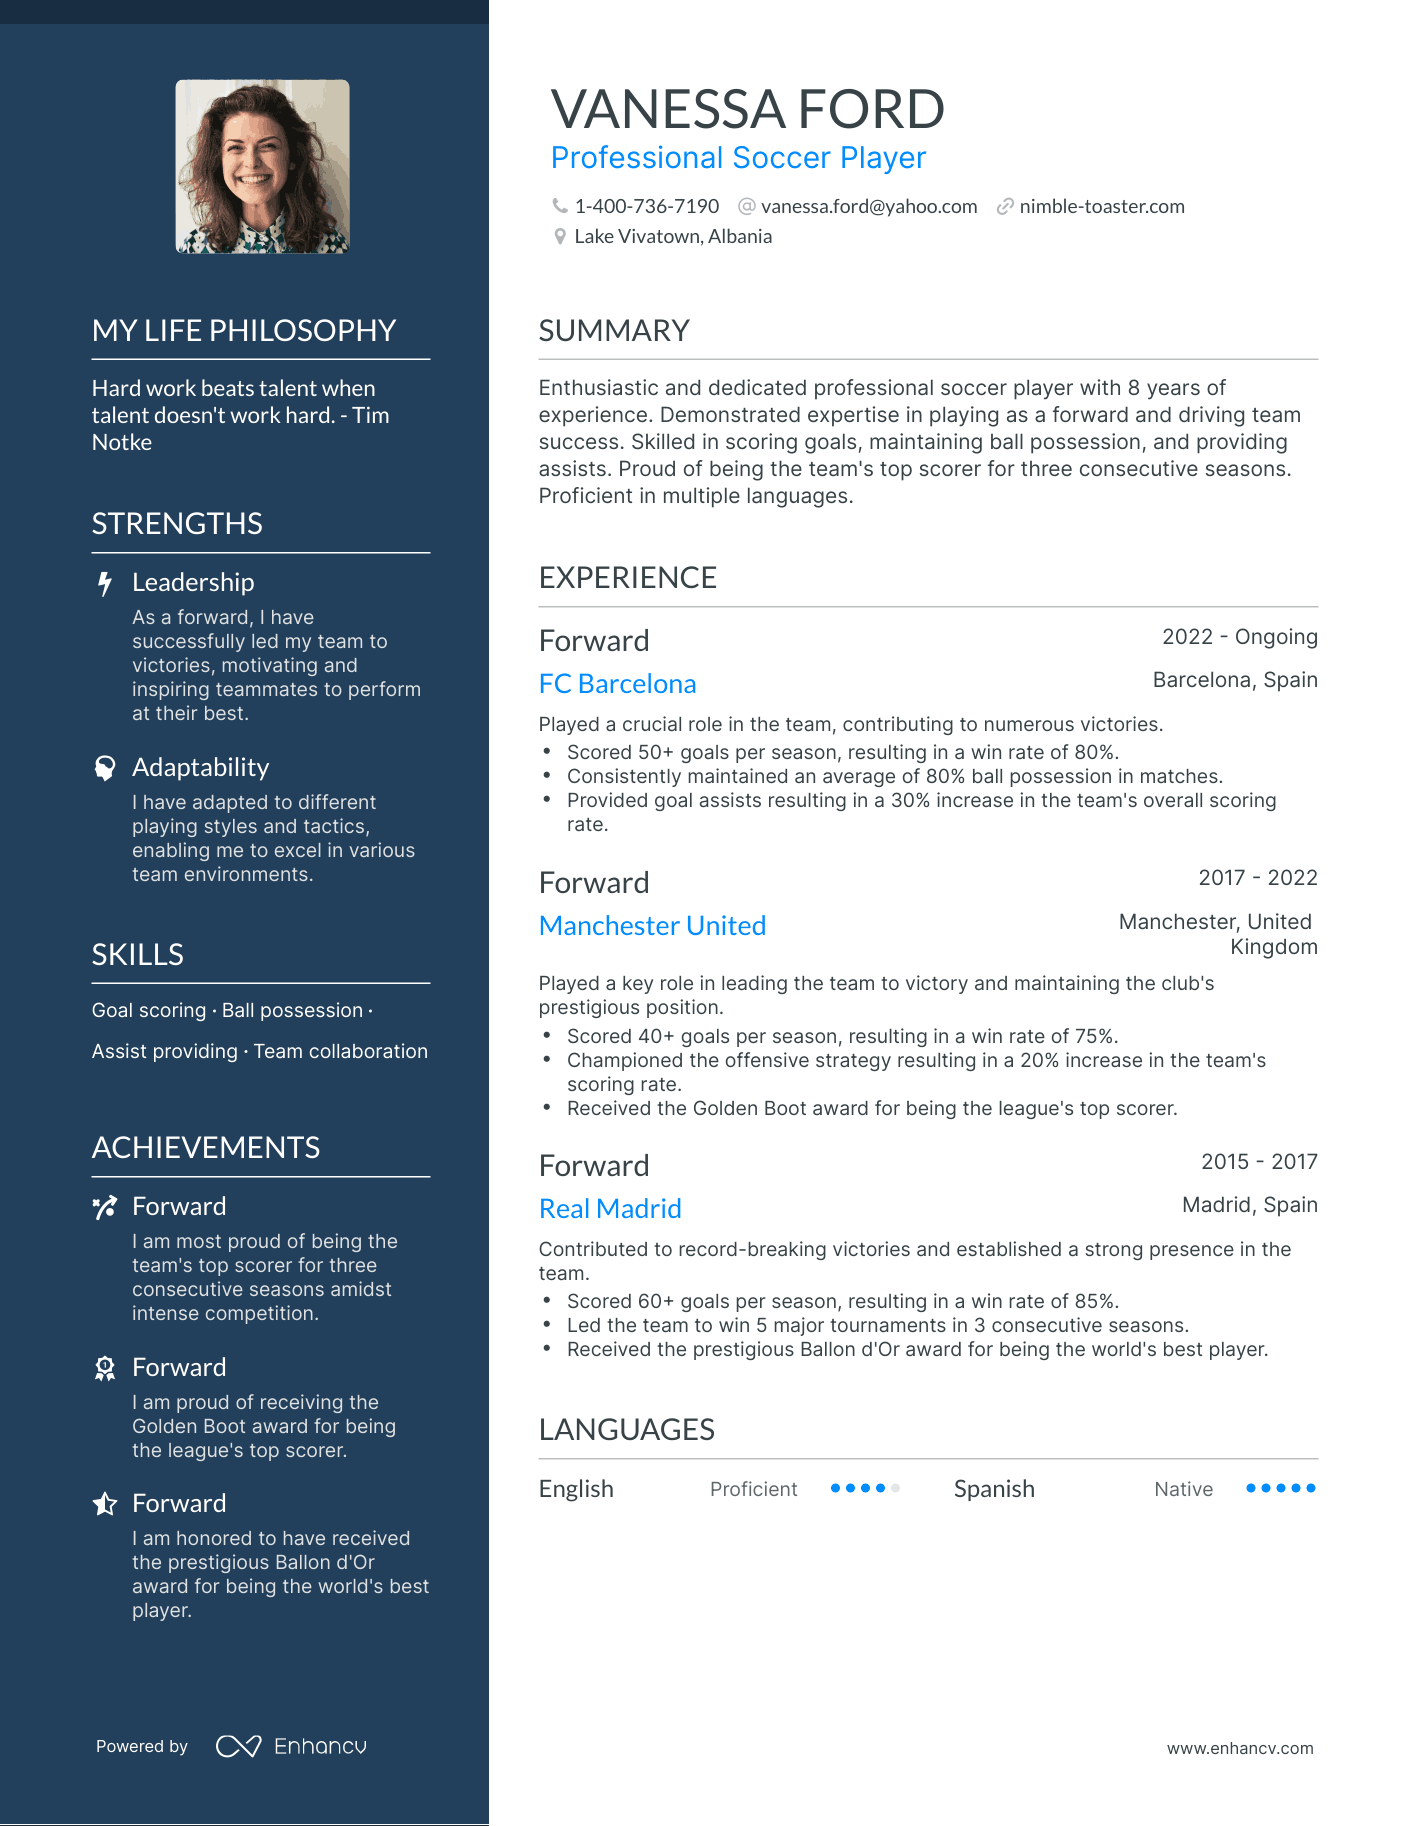 Professional Soccer Player resume example